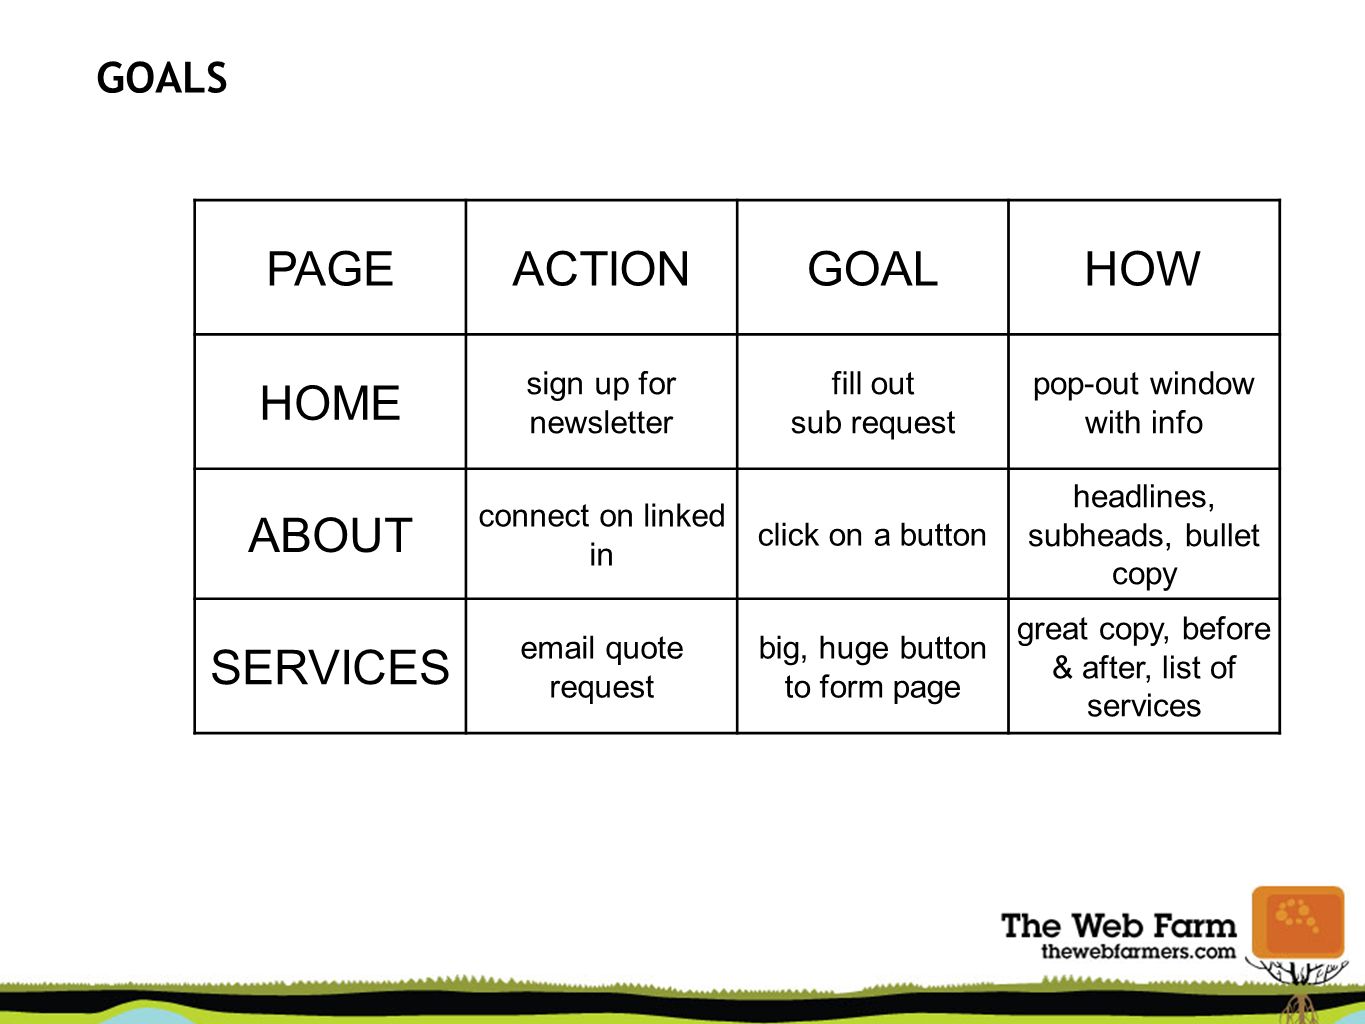 GOALS PAGEACTIONGOALHOW HOME sign up for newsletter fill out sub request pop-out window with info ABOUT connect on linked in click on a button headlines, subheads, bullet copy SERVICES  quote request big, huge button to form page great copy, before & after, list of services